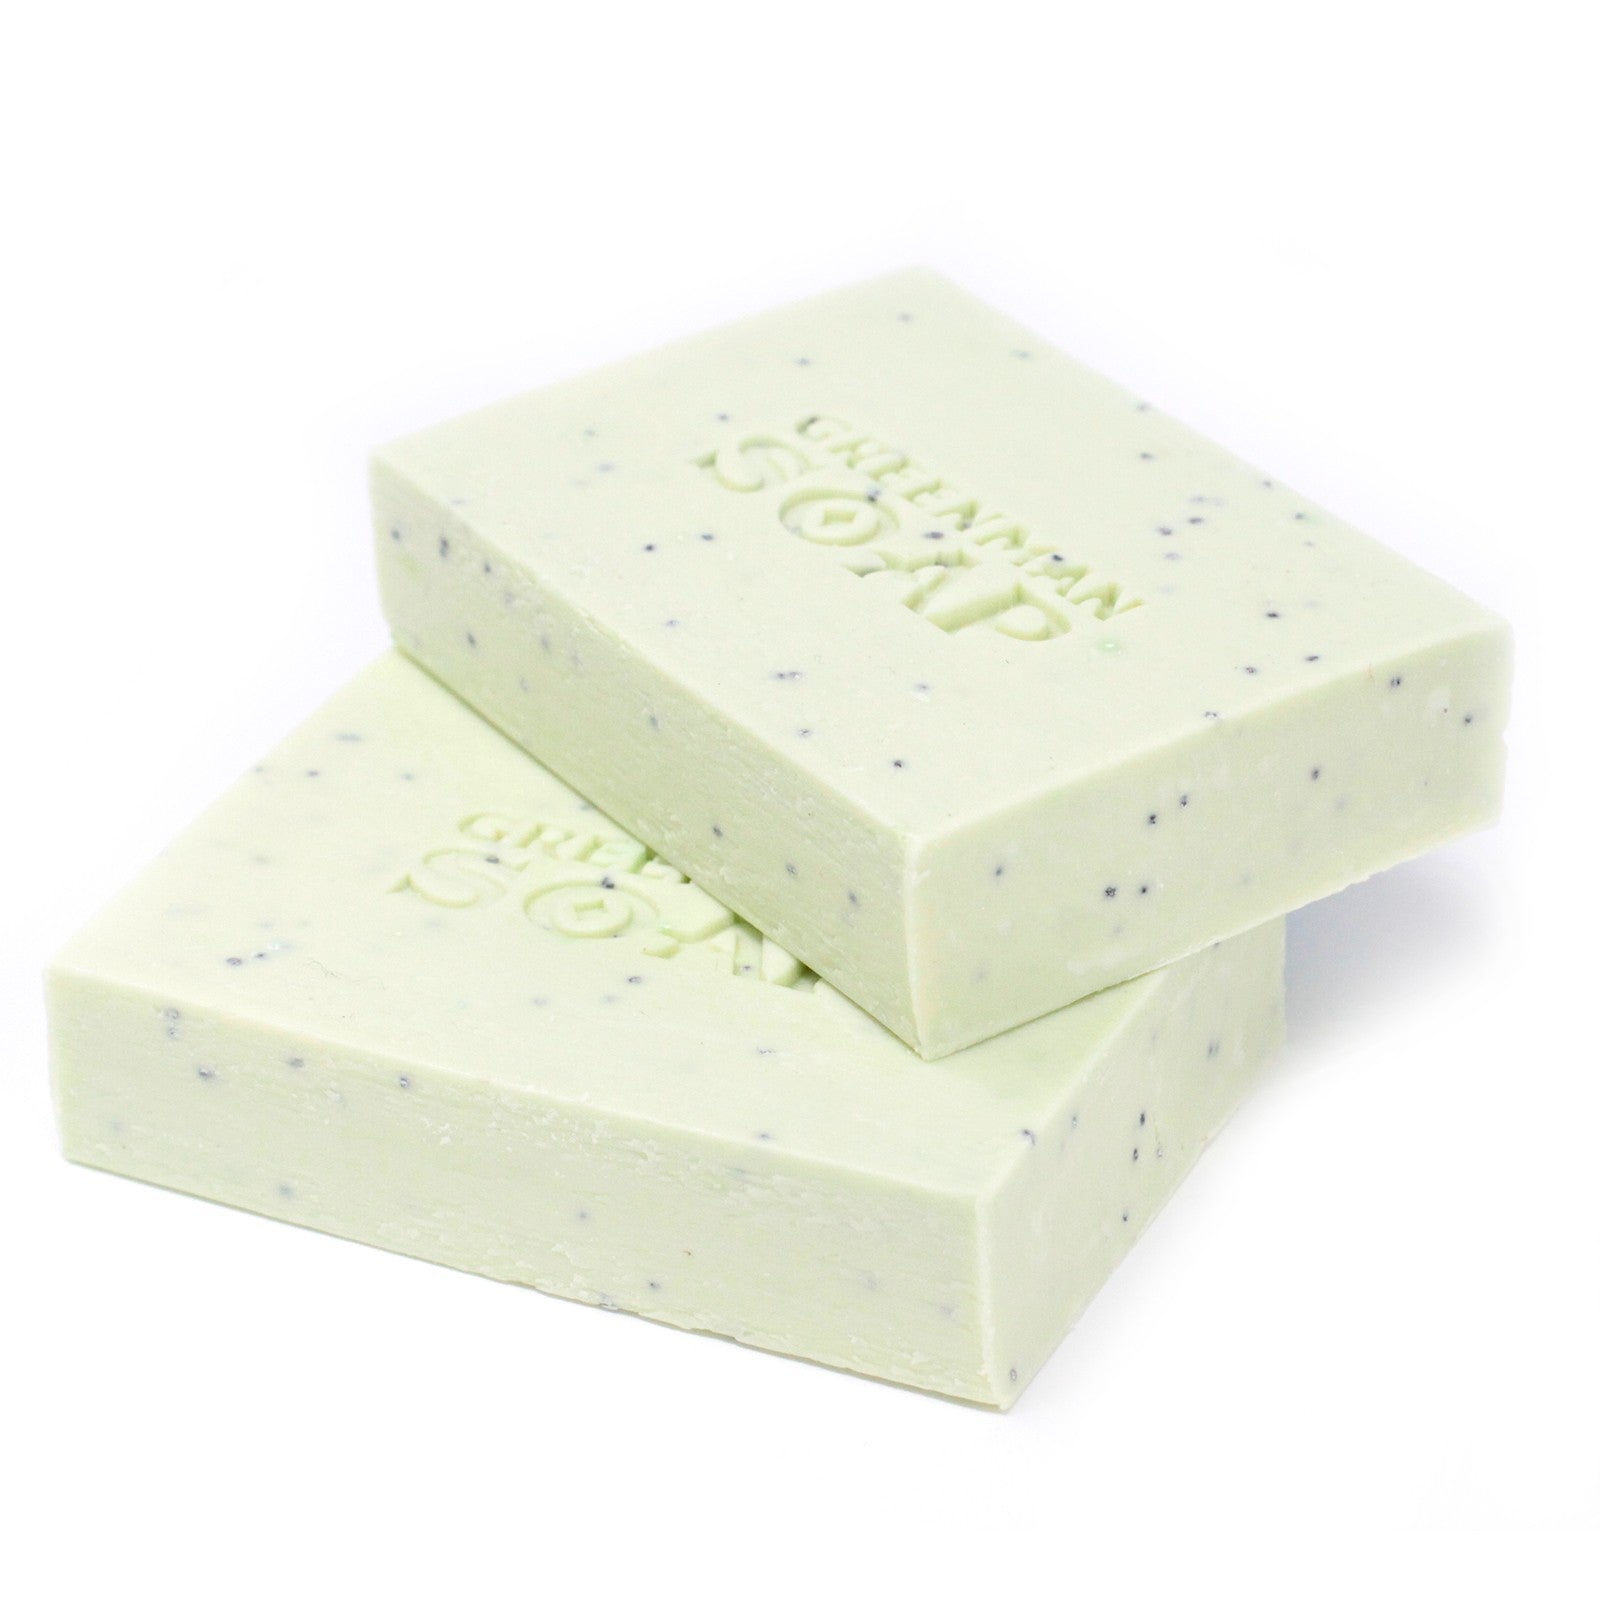 View Greenman Soap Slice 100g Antiseptic Spot Attack information